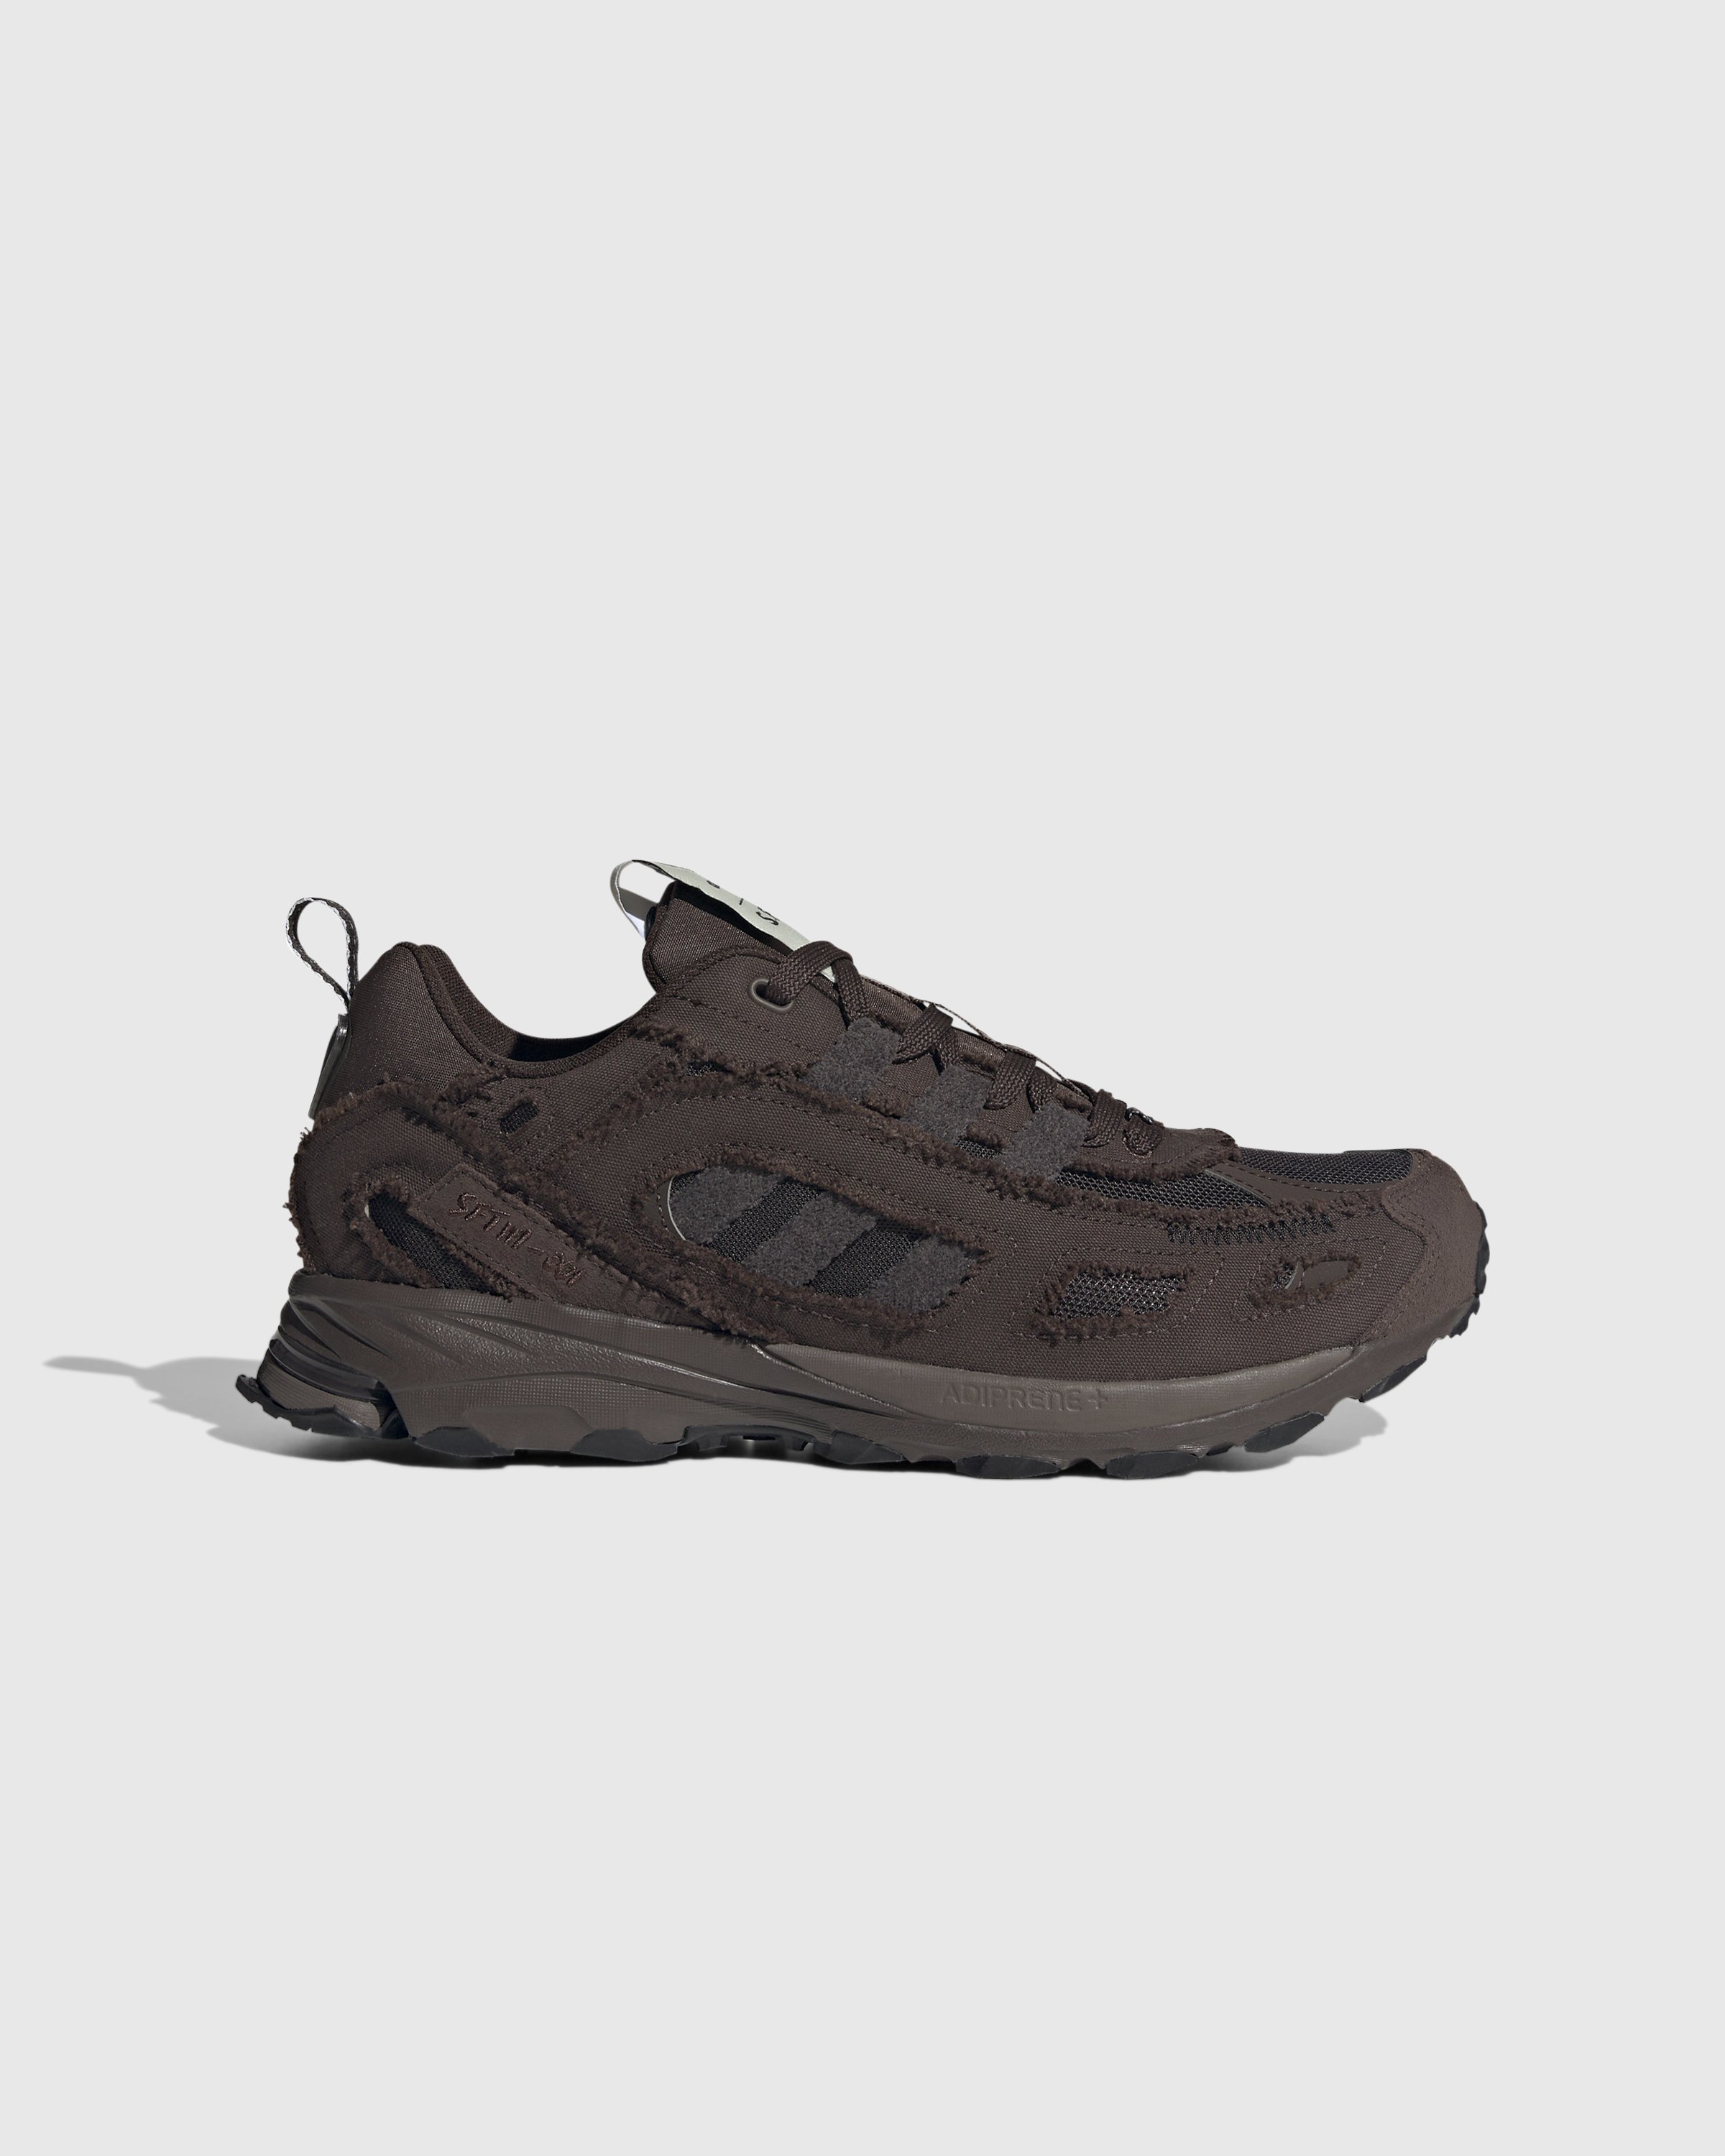 Song For The Mute x Adidas - Shadowturf SFTM Brown - Footwear - Brown - Image 1